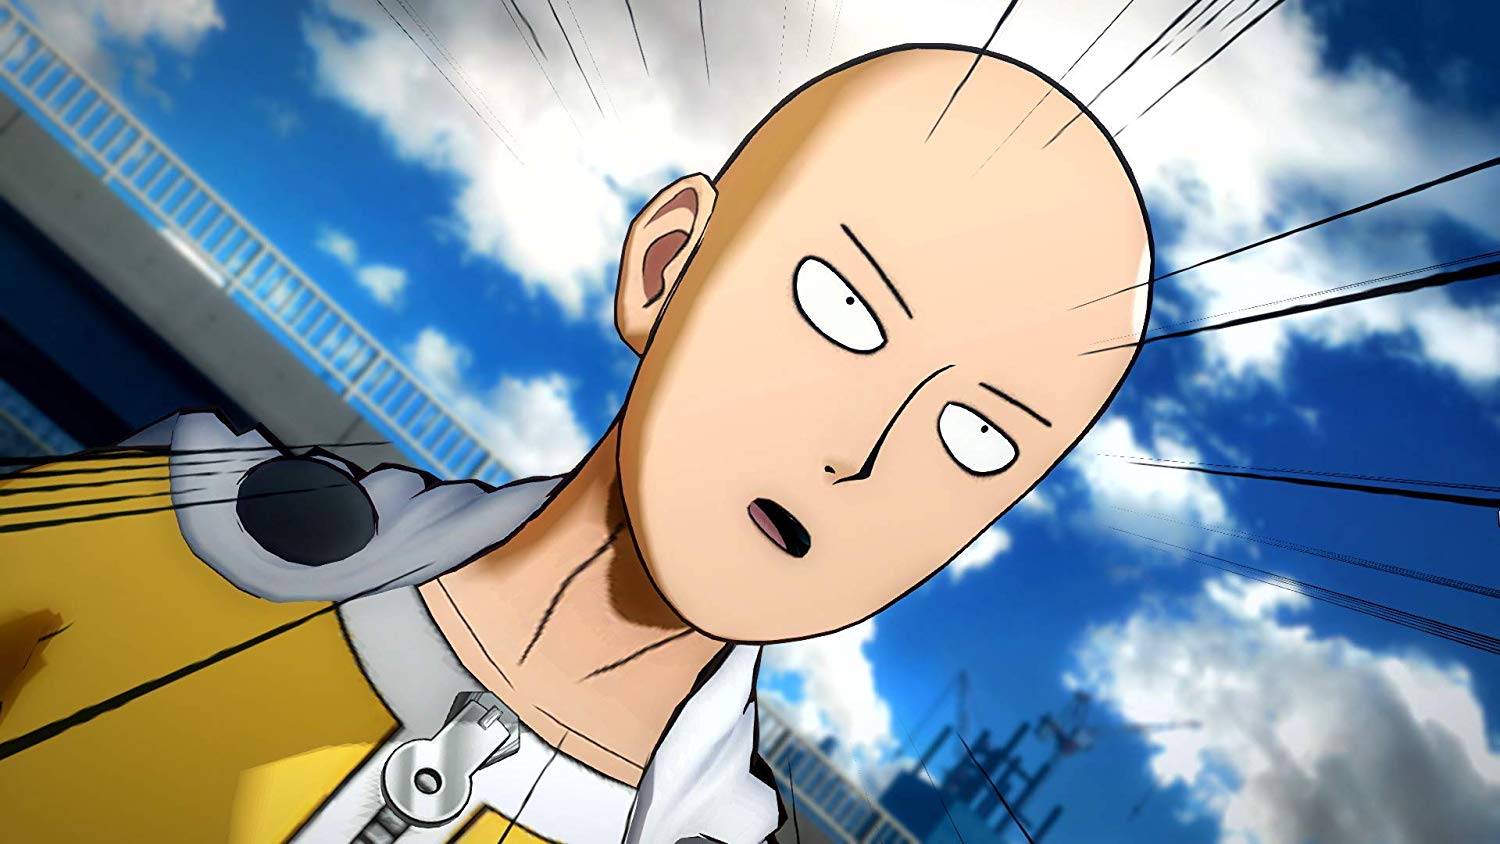 PS4 One Punch Man -  A Hero Nobody Knows 